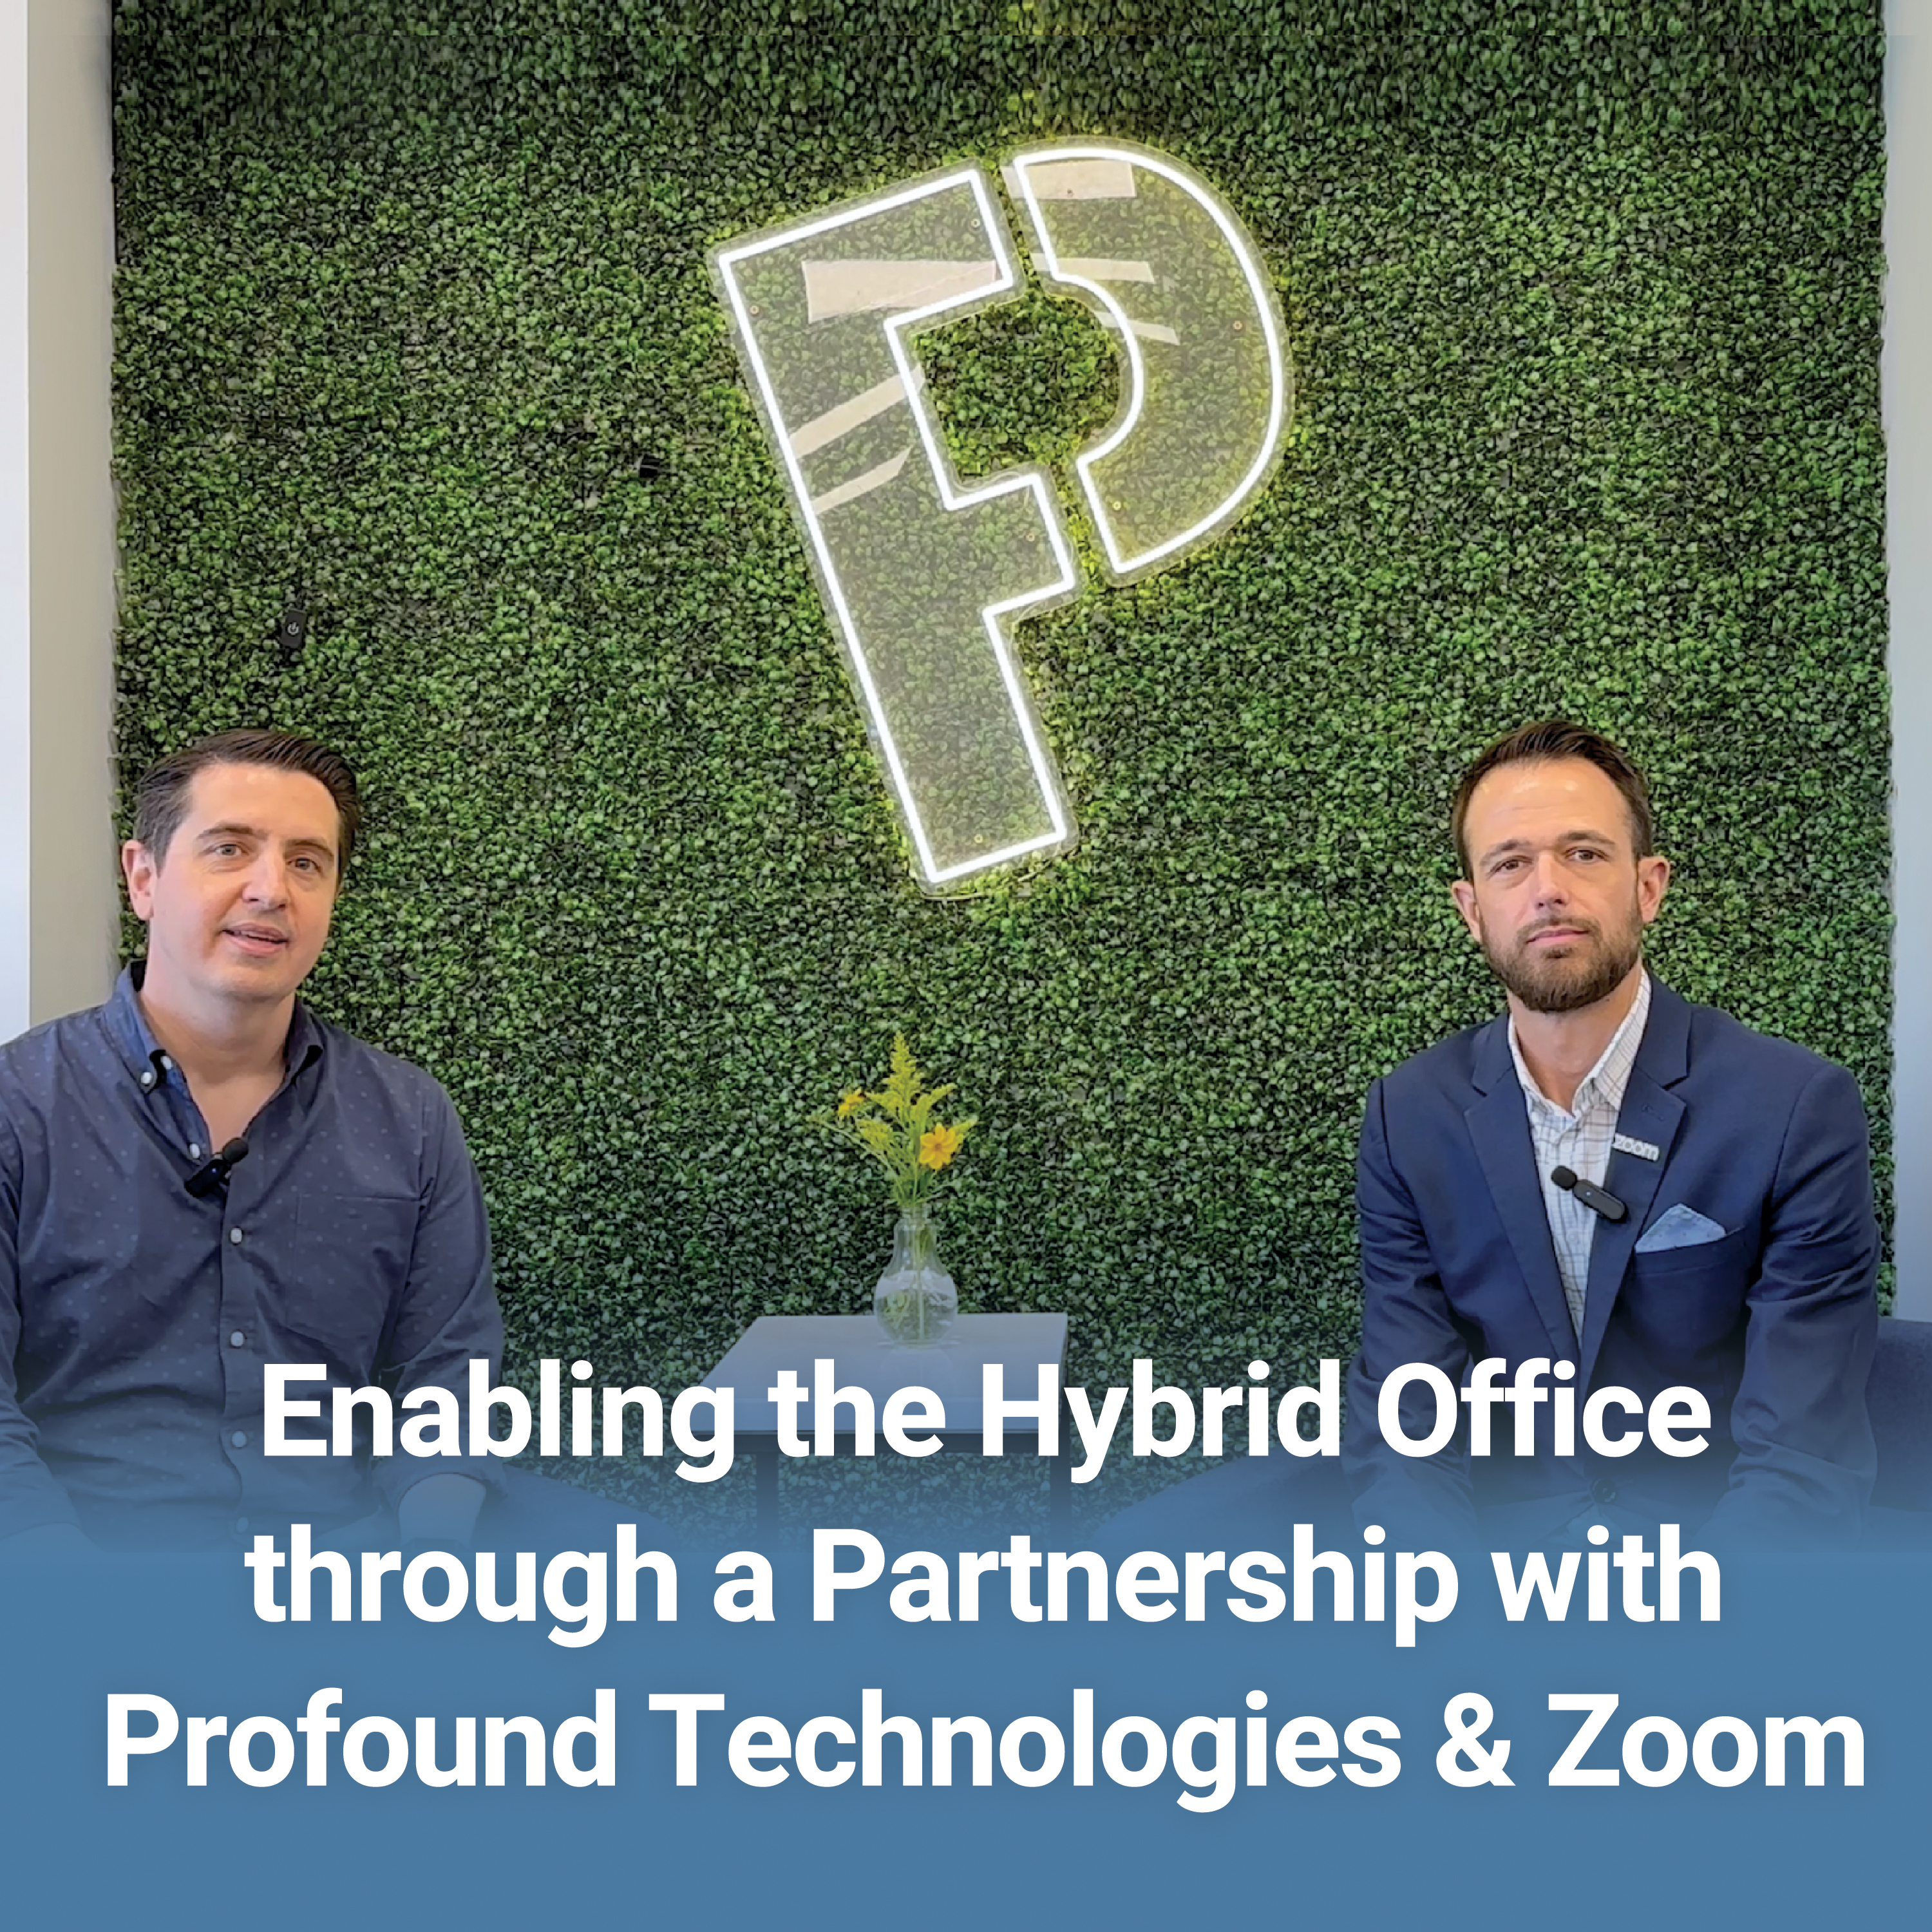 Empowering Hybrid Office with Profound Technologies & Zoom